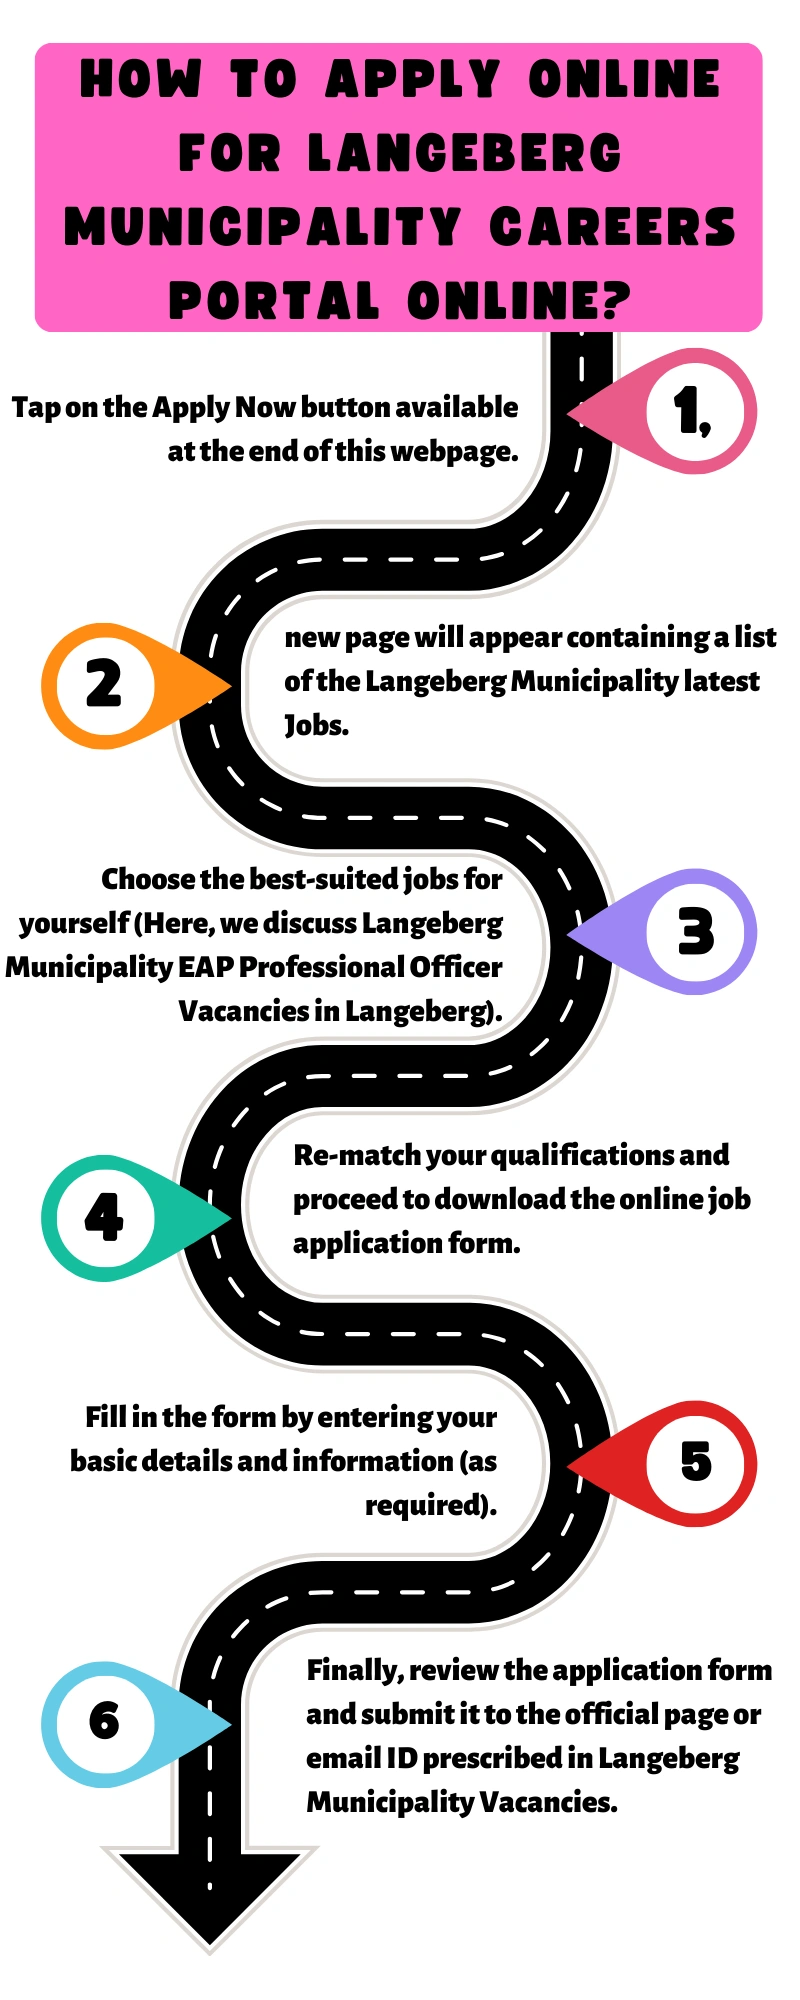 How to Apply online for Langeberg Municipality Careers Portal Online?